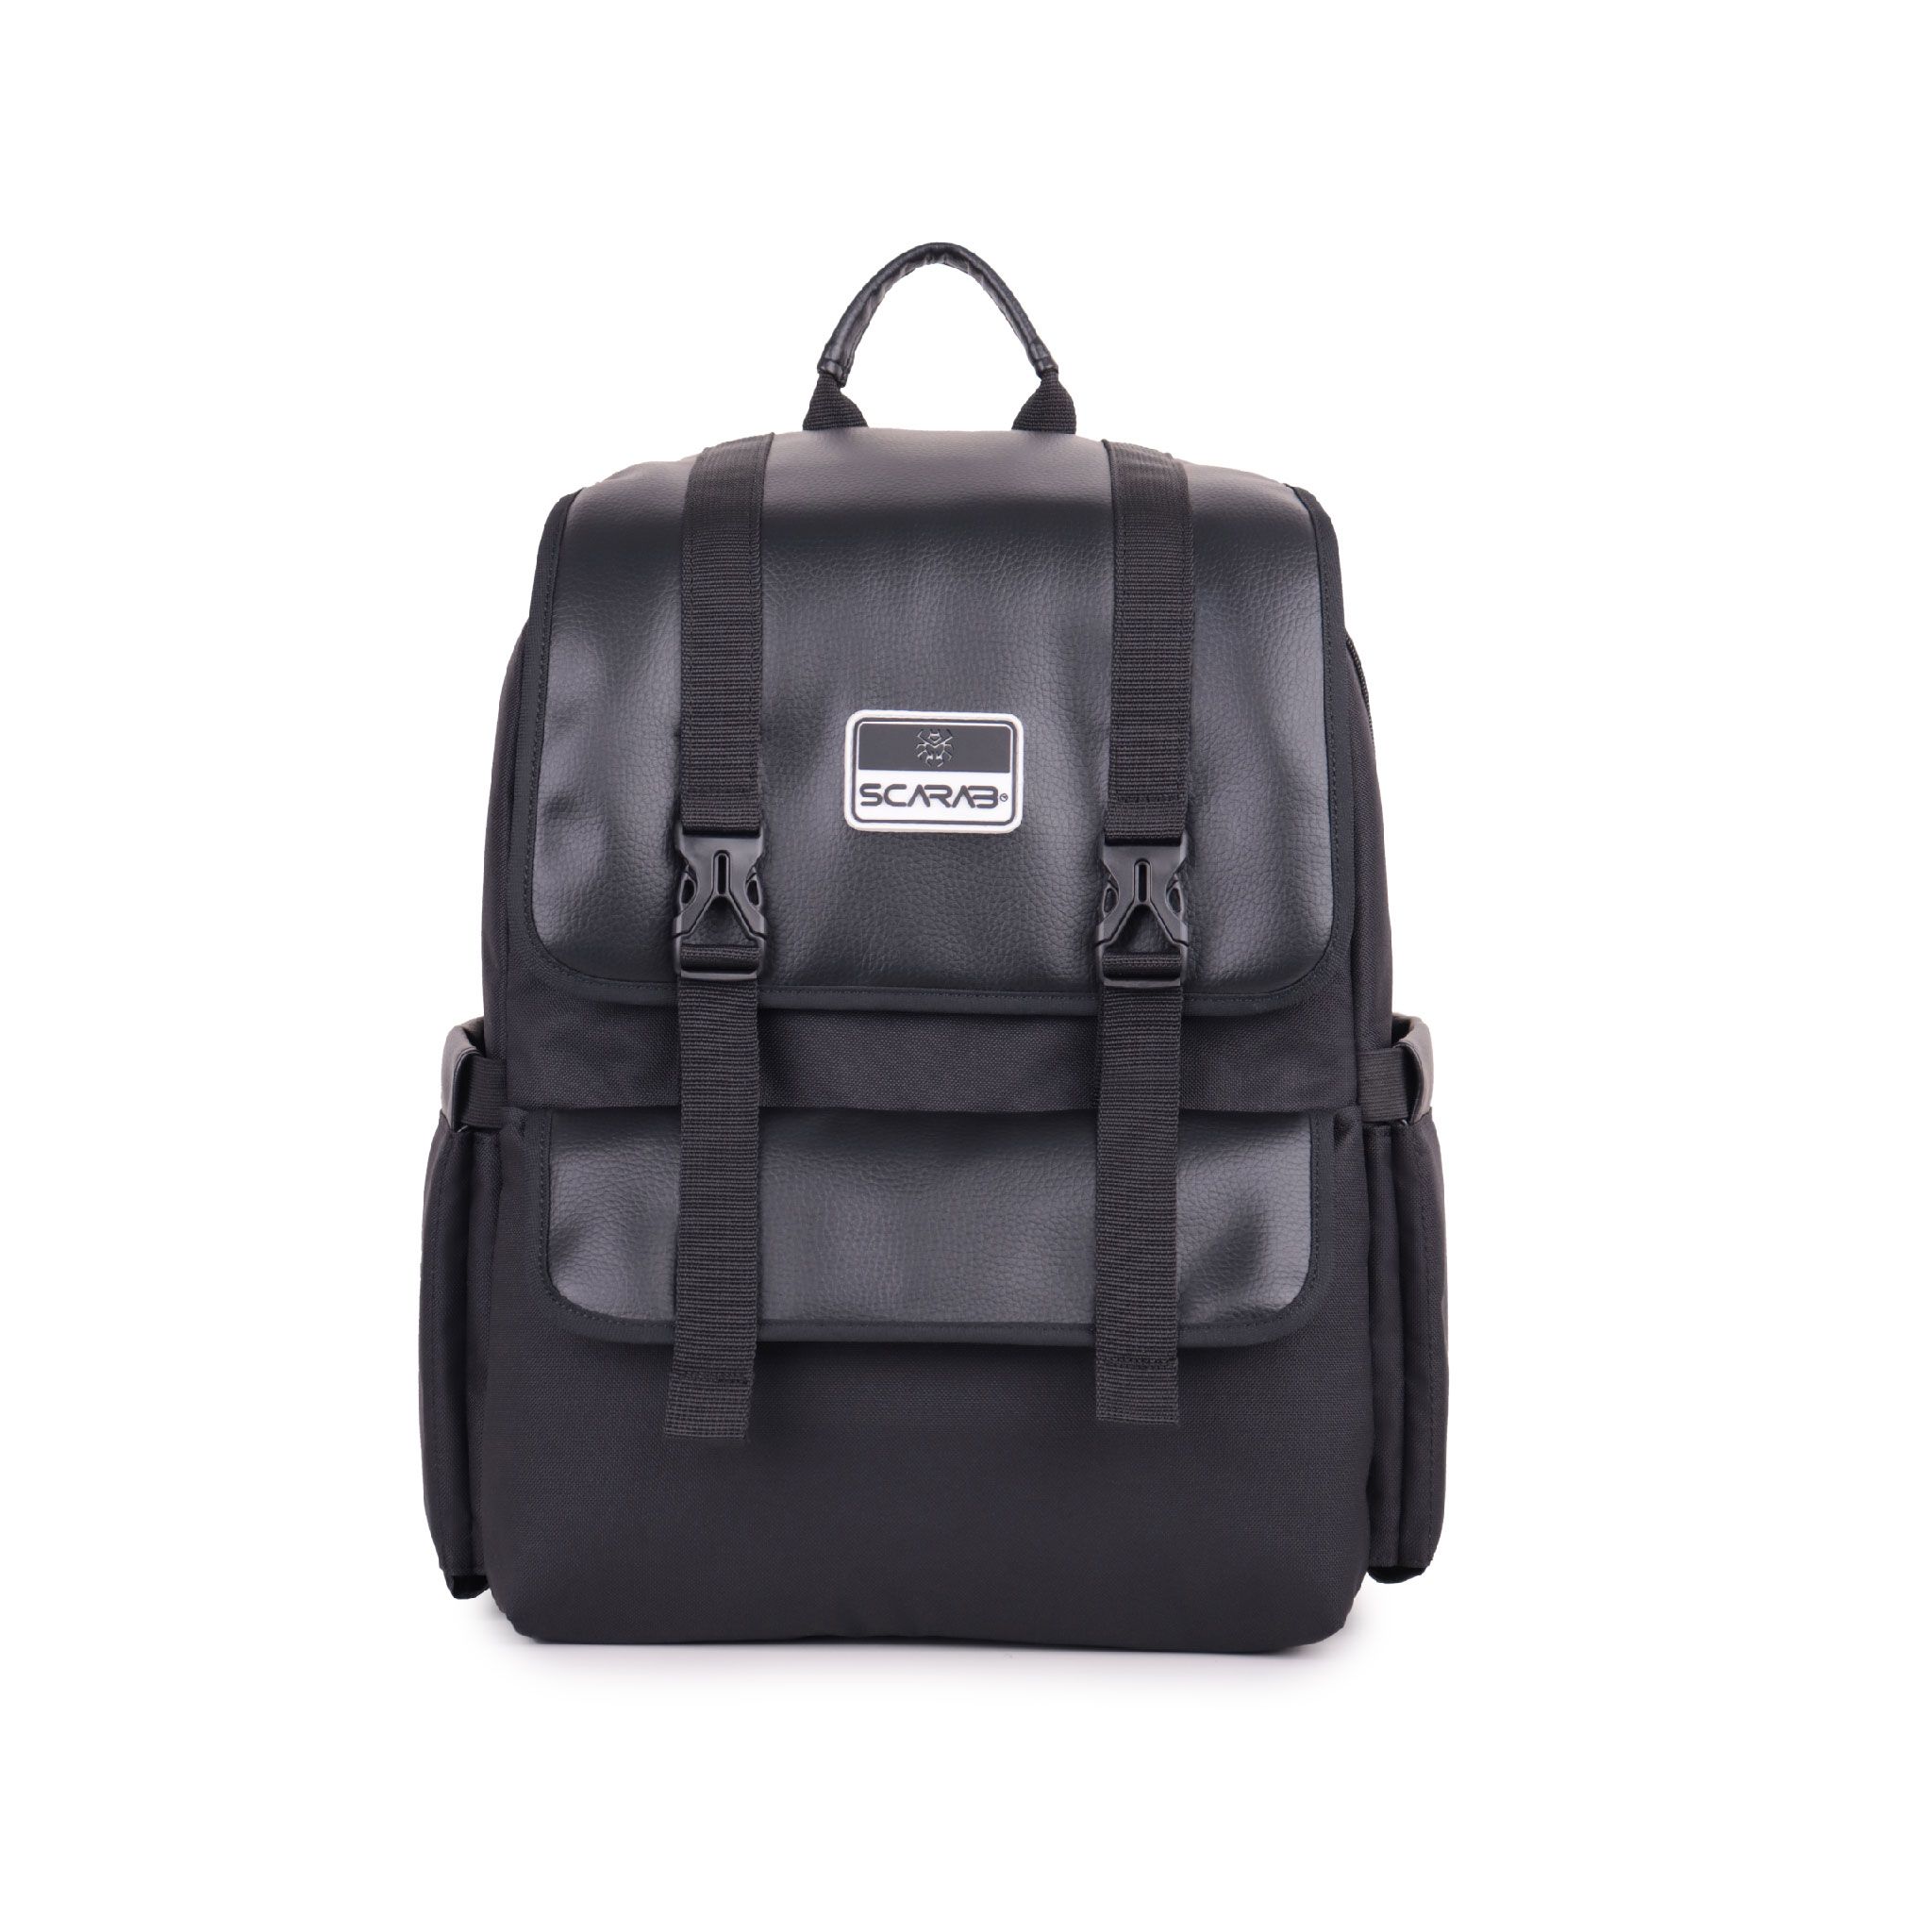  Passion Backpack - Black Leather 